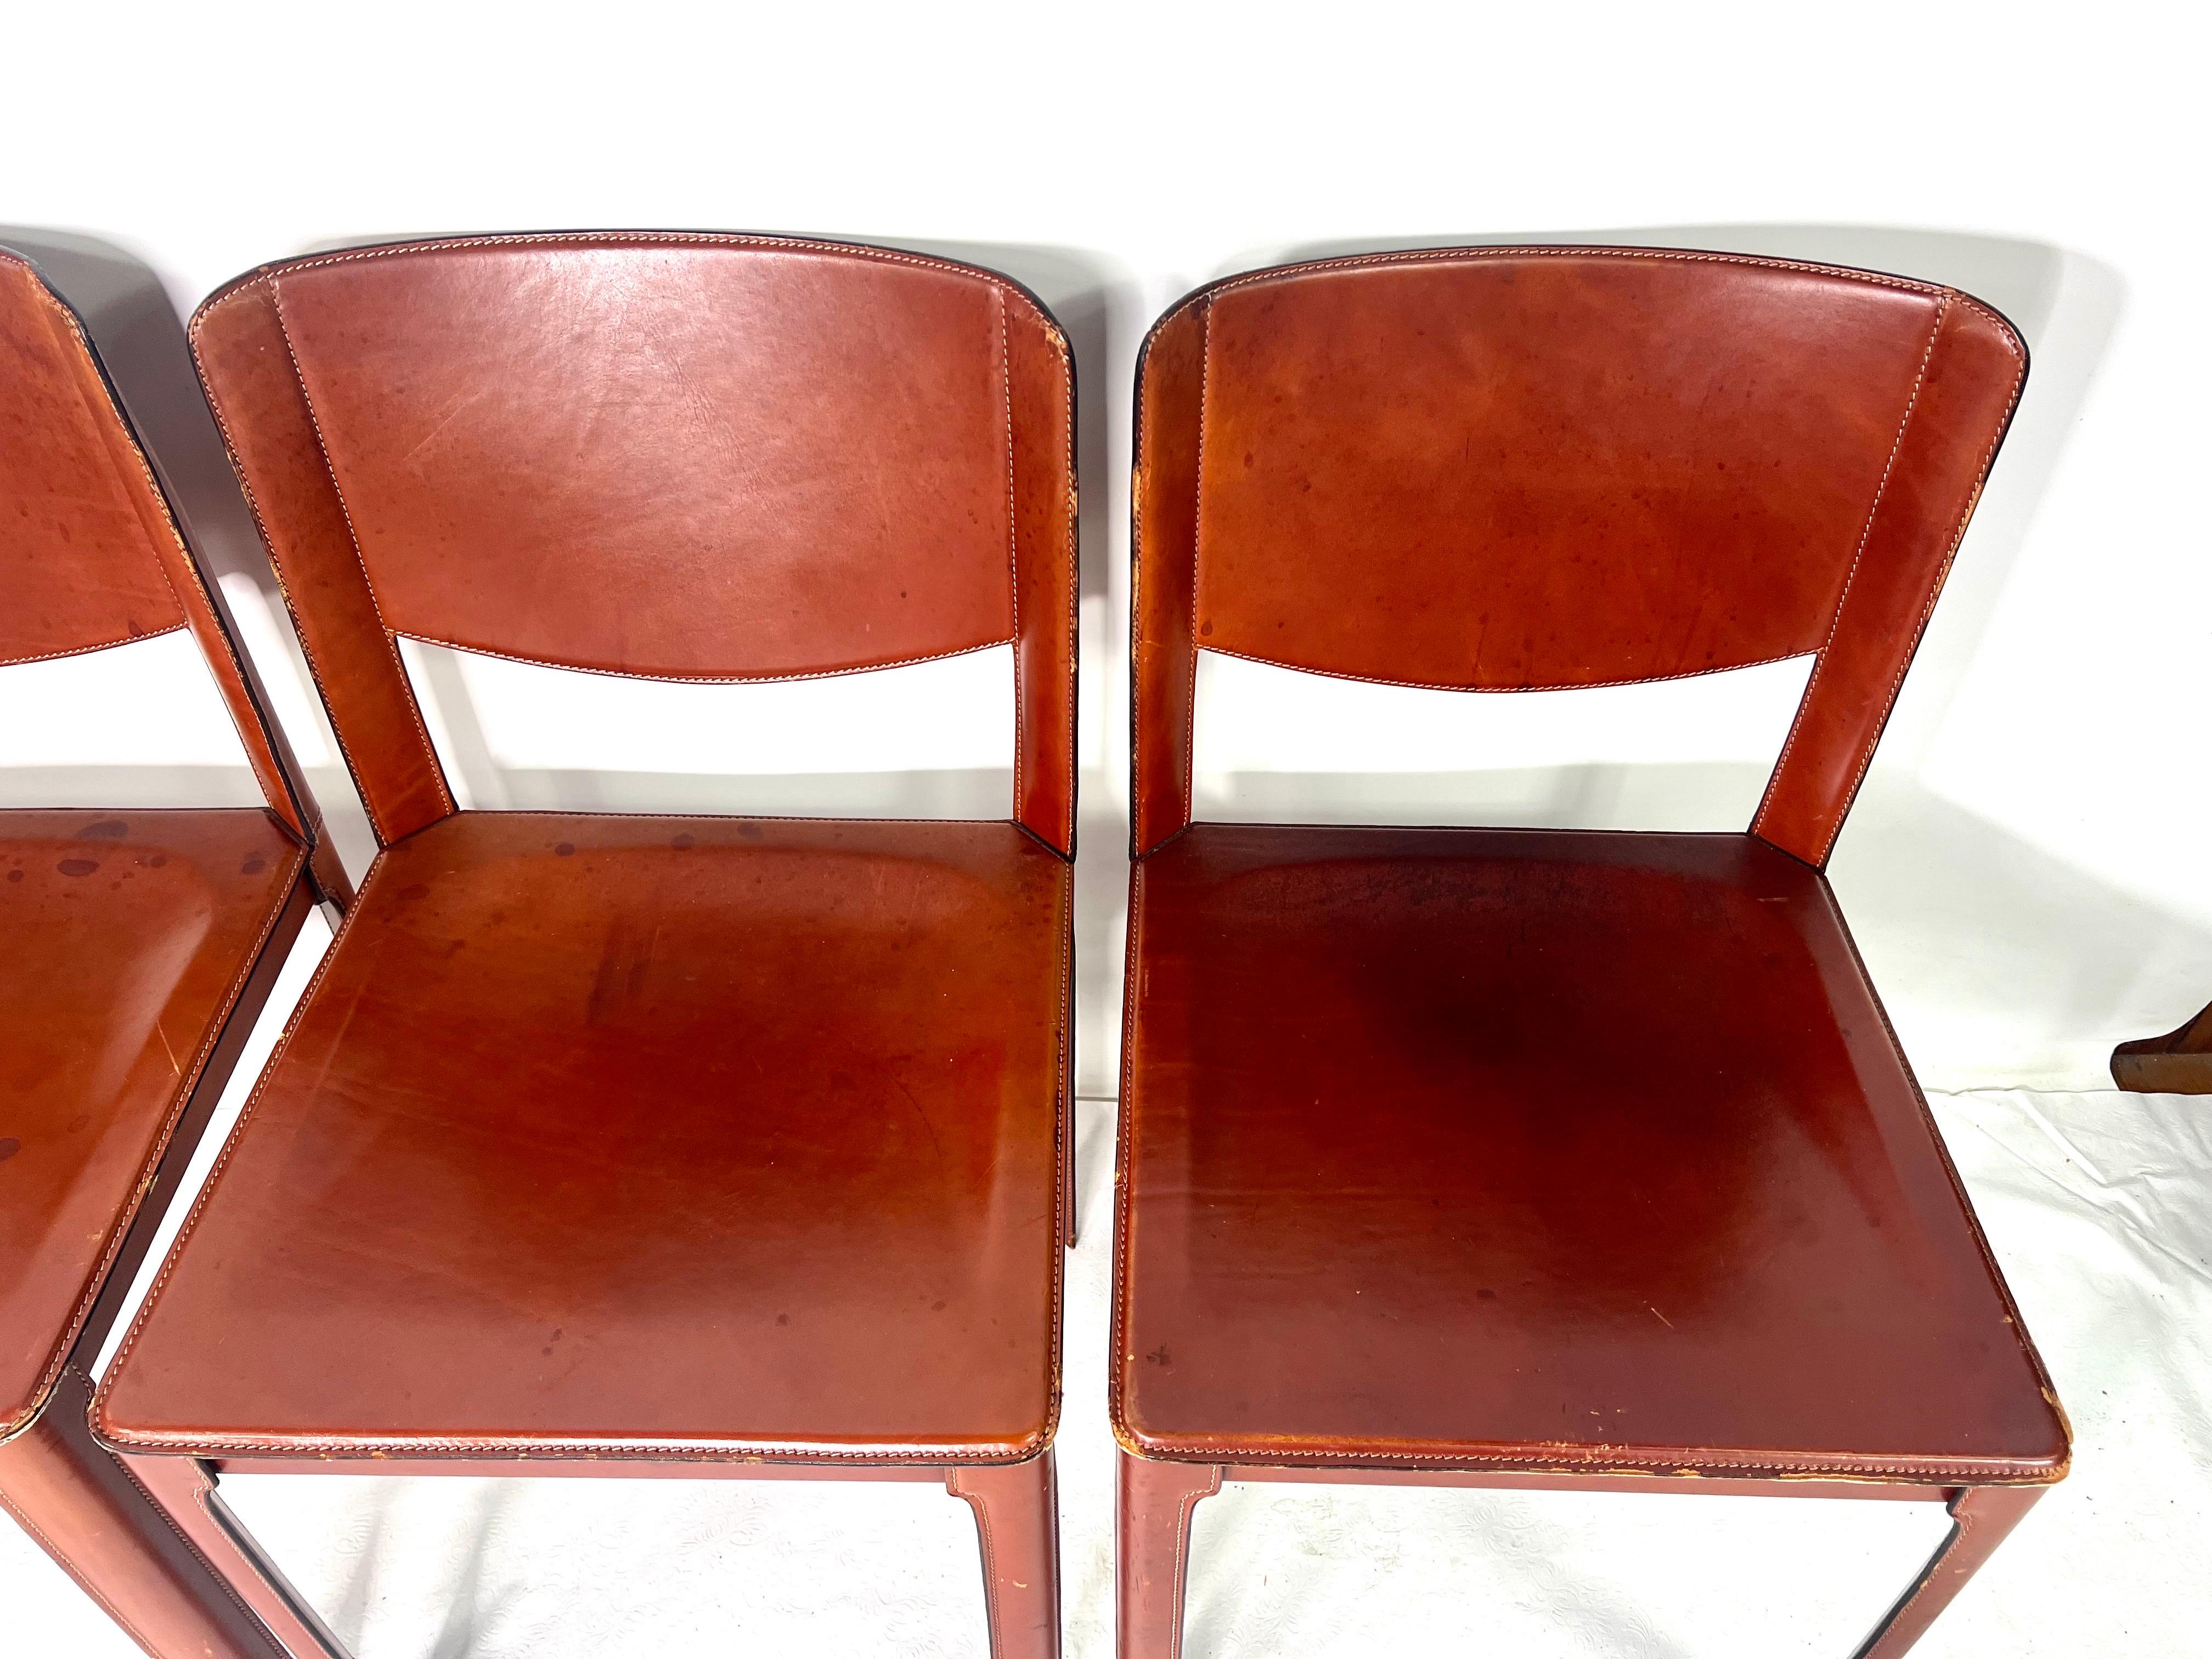 Vintage Modern Matteo Grassi Red Leather Chairs, Set of 4 In Good Condition For Sale In Esperance, NY